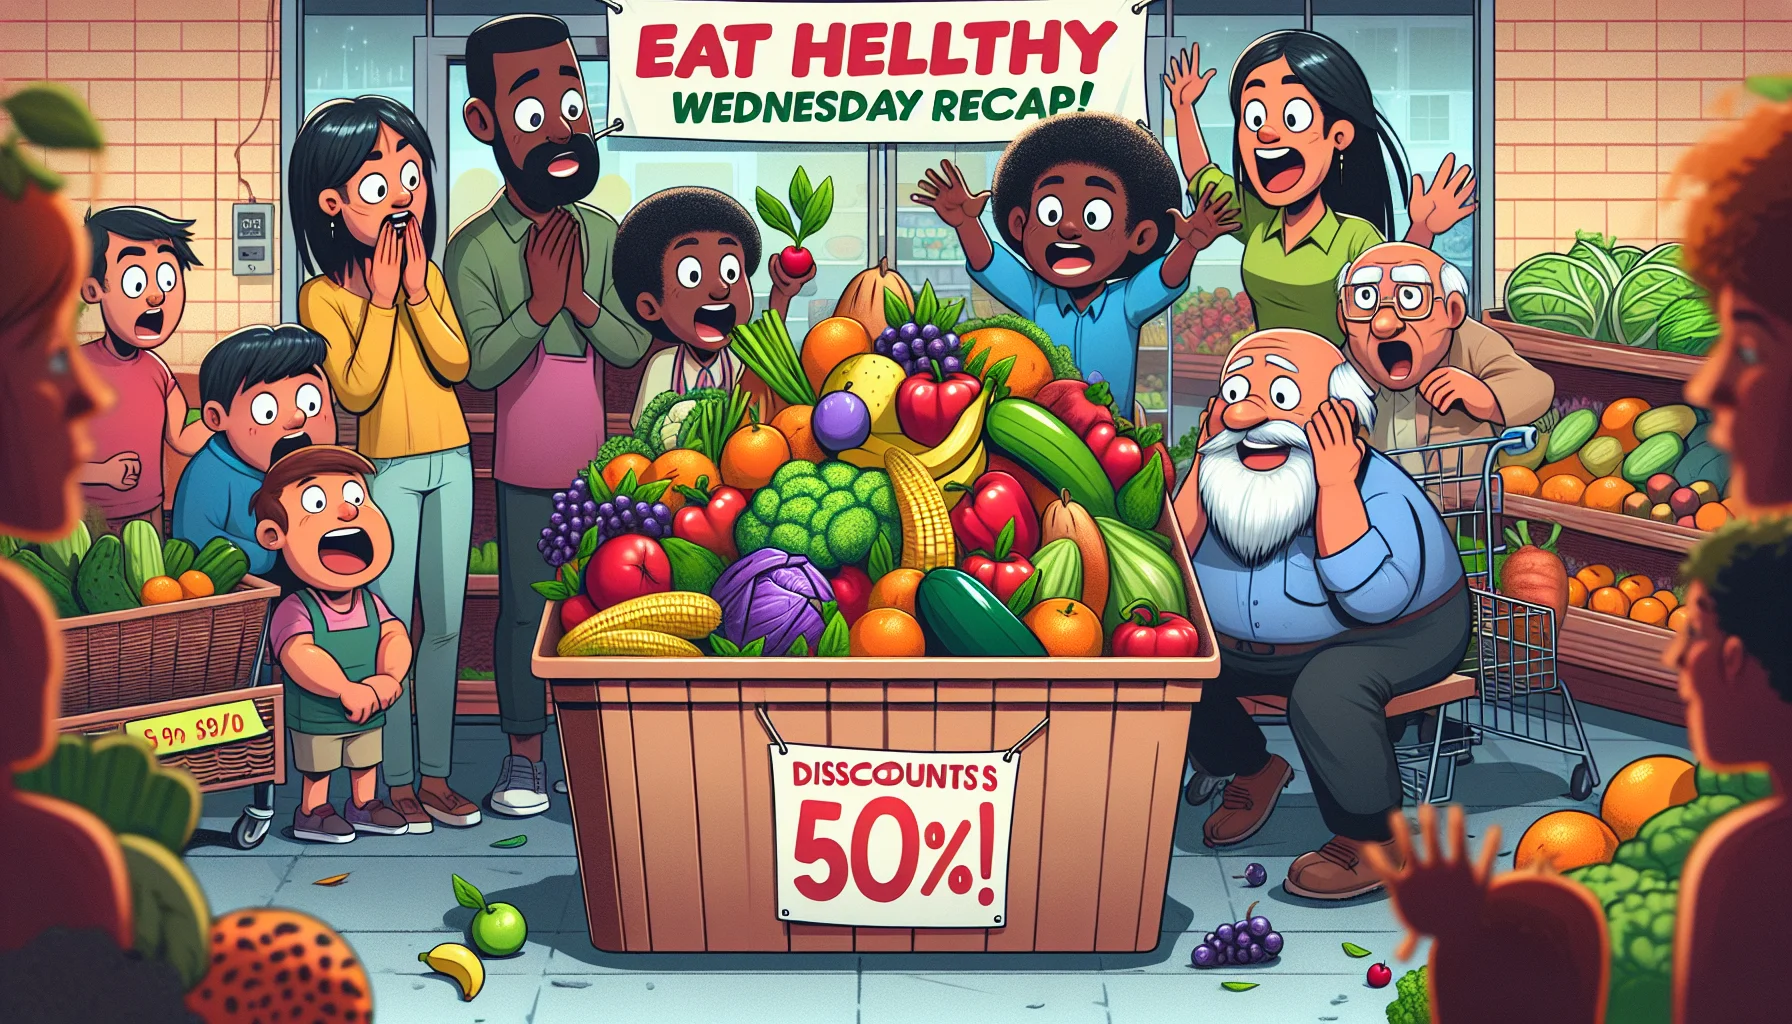 Create a humorous illustration on the concept of 'Health and Wellness Wednesday Recap'. Picture an array of colorful fresh fruits and vegetables packaged in an exaggeratedly large discounts bin in a local grocery store. Meanwhile, a diverse group of individuals - a Black female, Hispanic man, Caucasian kid, and Middle-Eastern grandfather - are depicted shopping excitedly, some holding fruits and veggies, with wide eyes and surprised faces seeing the remarkable low prices. A banner overhead should read 'Eat Healthy For Less!' Show some reactions of people around the shop, such as a worker restocking the bin with vegetables or a shopper scratching their head in astonishment.